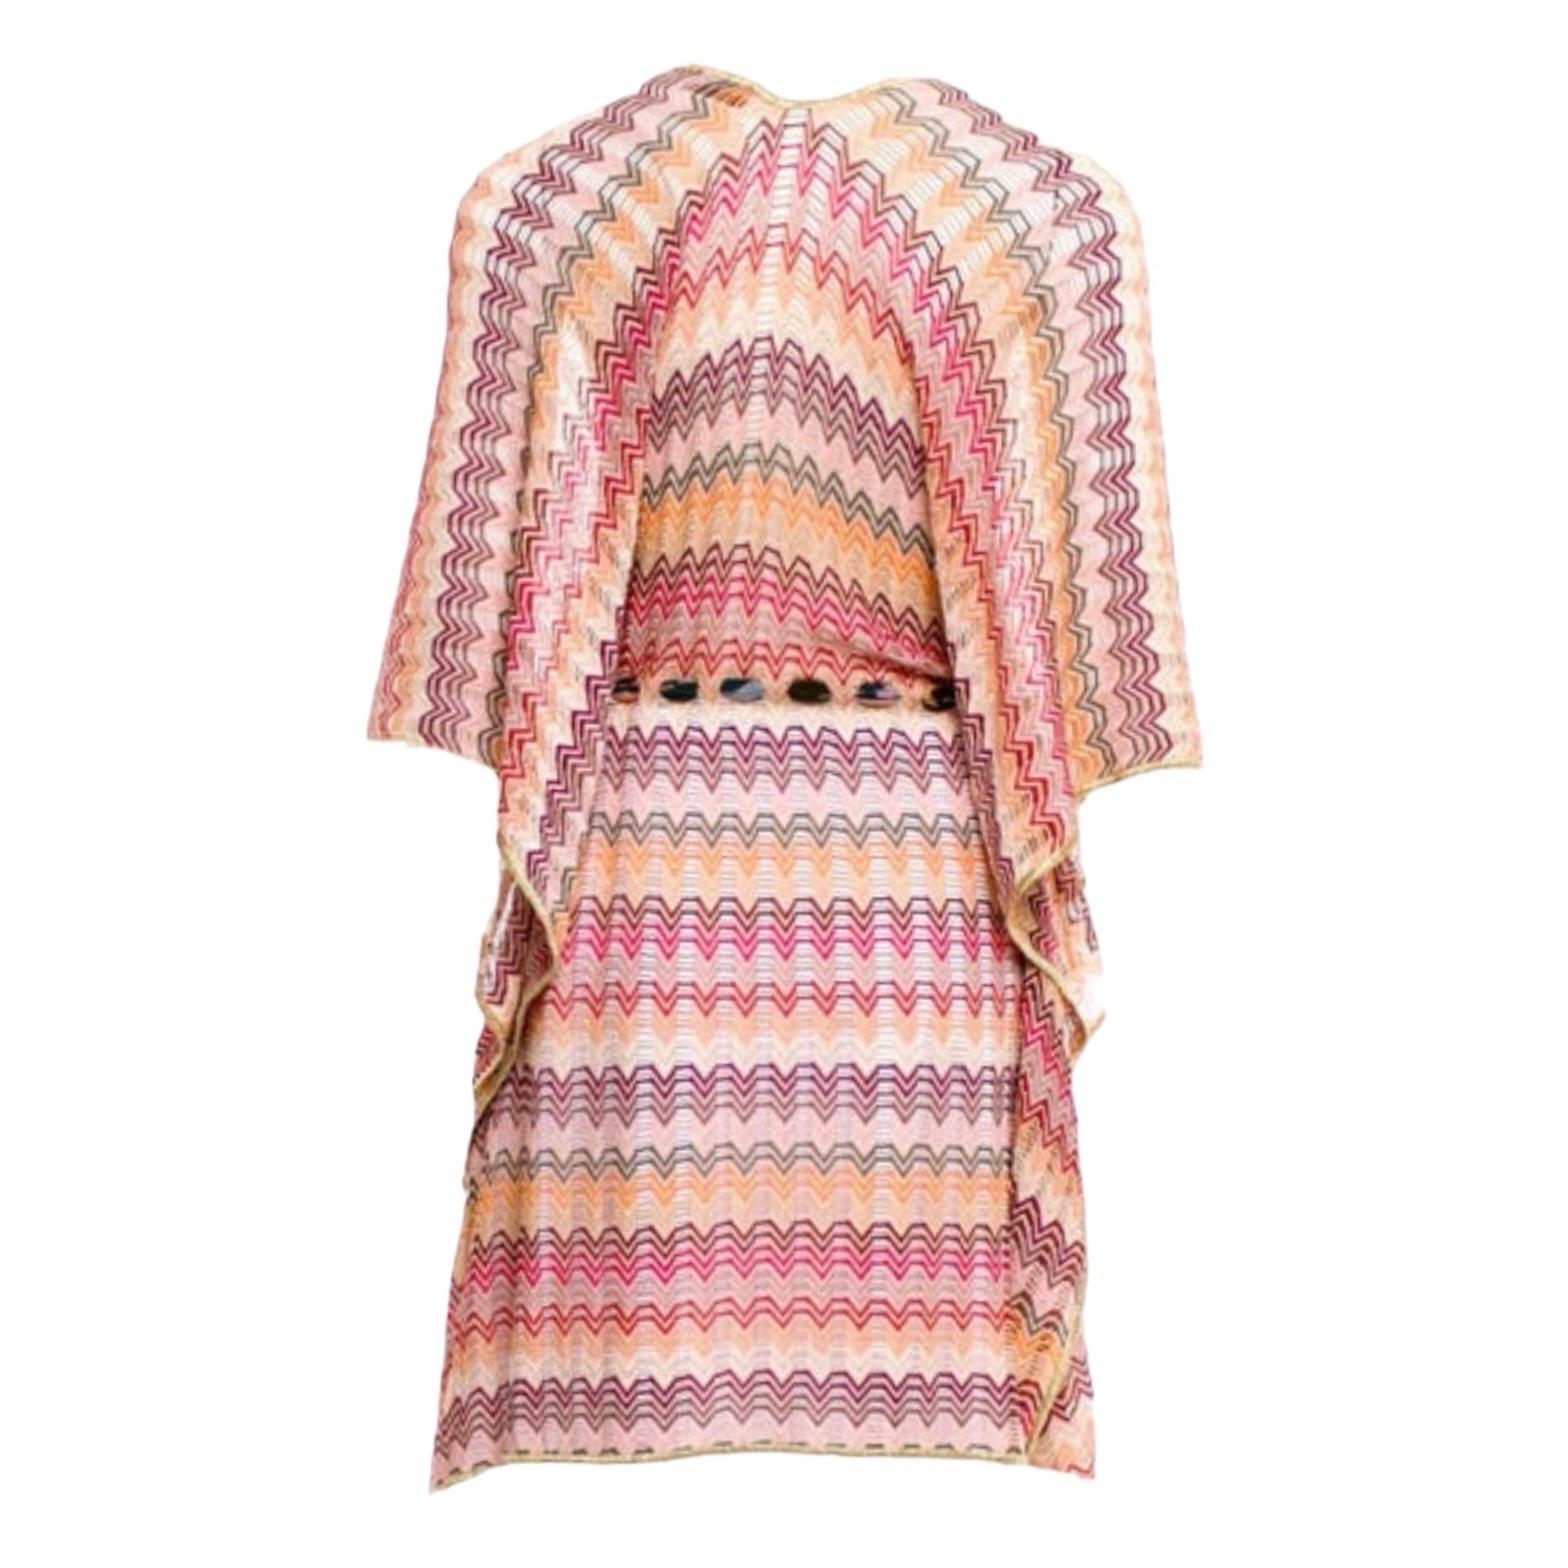 A rare MISSONI gold metallic crochet knit kaftan - sold out immediately
Grab your chance to own this iconic MISSONI piece!

DETAILS:

    Classic MISSONI signature zigzag knit
Beautiful warm colors mixed with golden lurex thread
Golden trimmings
   